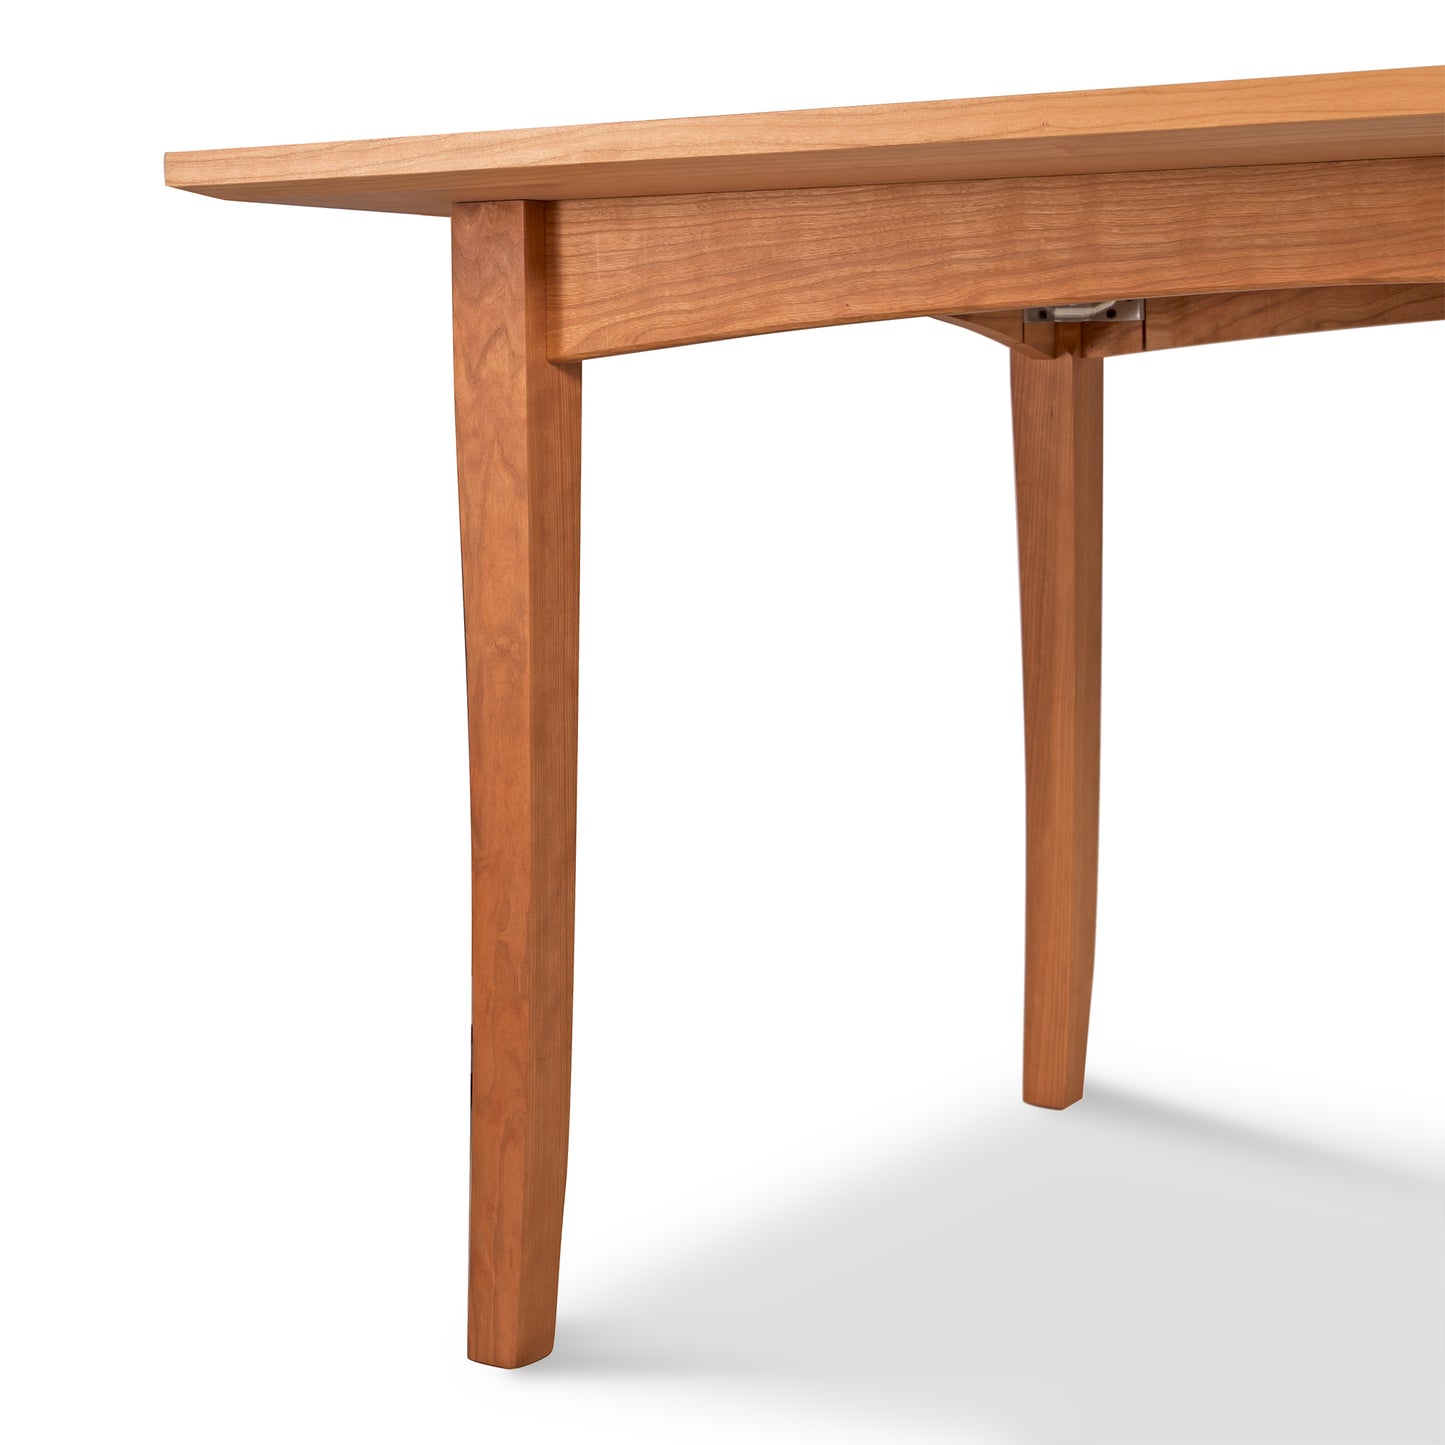 A close-up view of a Maple Corner Woodworks American Shaker Rectangular Solid Top Table, focusing on the corner section where the smooth tabletop meets the simple, straight leg. The background is plain white, emphasizing.